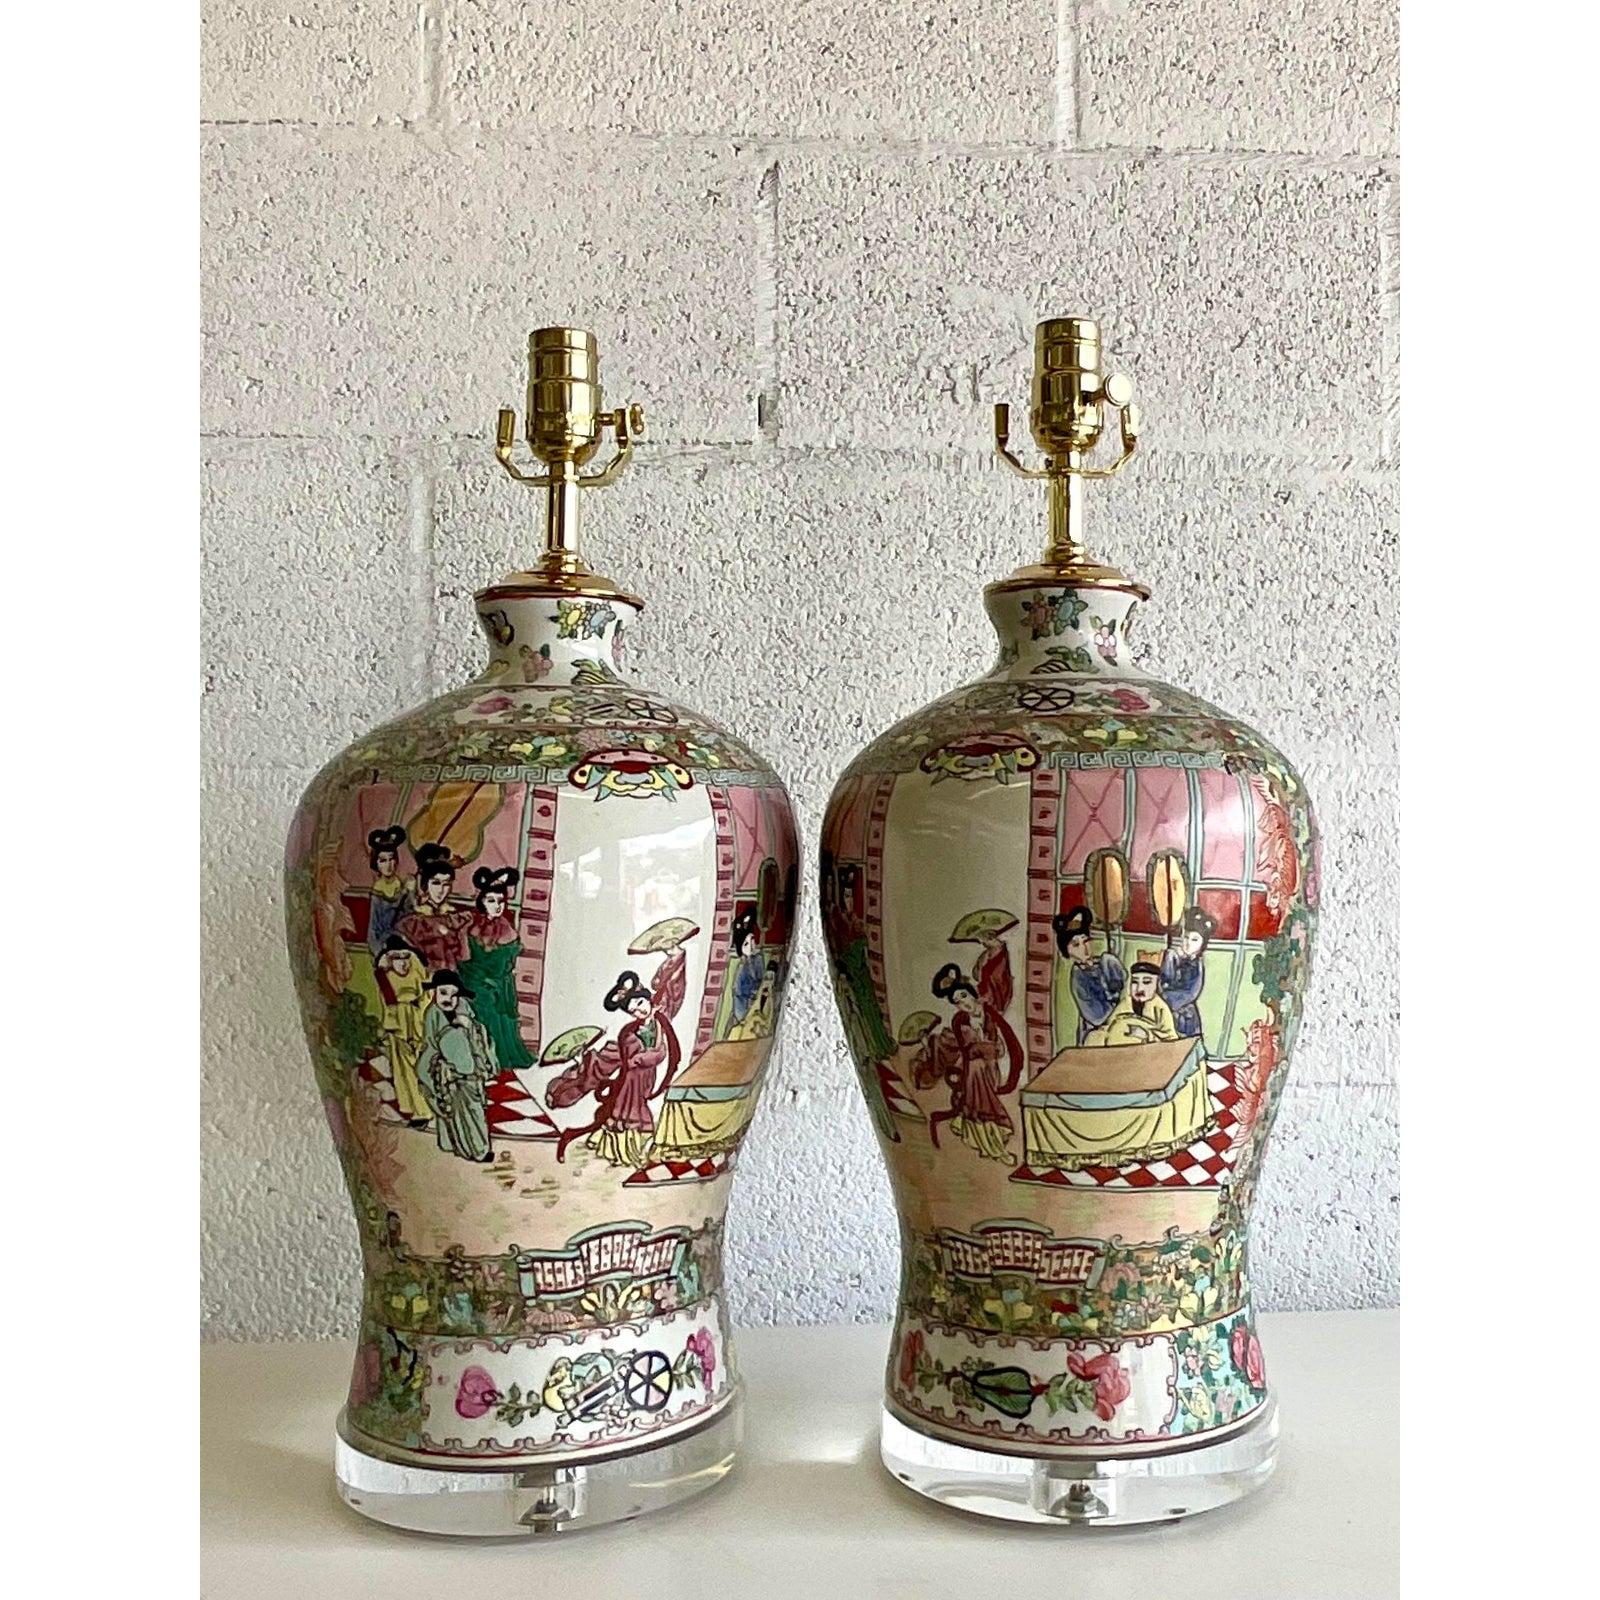 Stunning pair of vintage Rose Medallion table lamps. Iconic pastoral scenes of a royal family. Bright clear colors make these lamps a real standout. All new wiring and hardware and a new lucite plinth. Acquired from a Palm Beach estate.